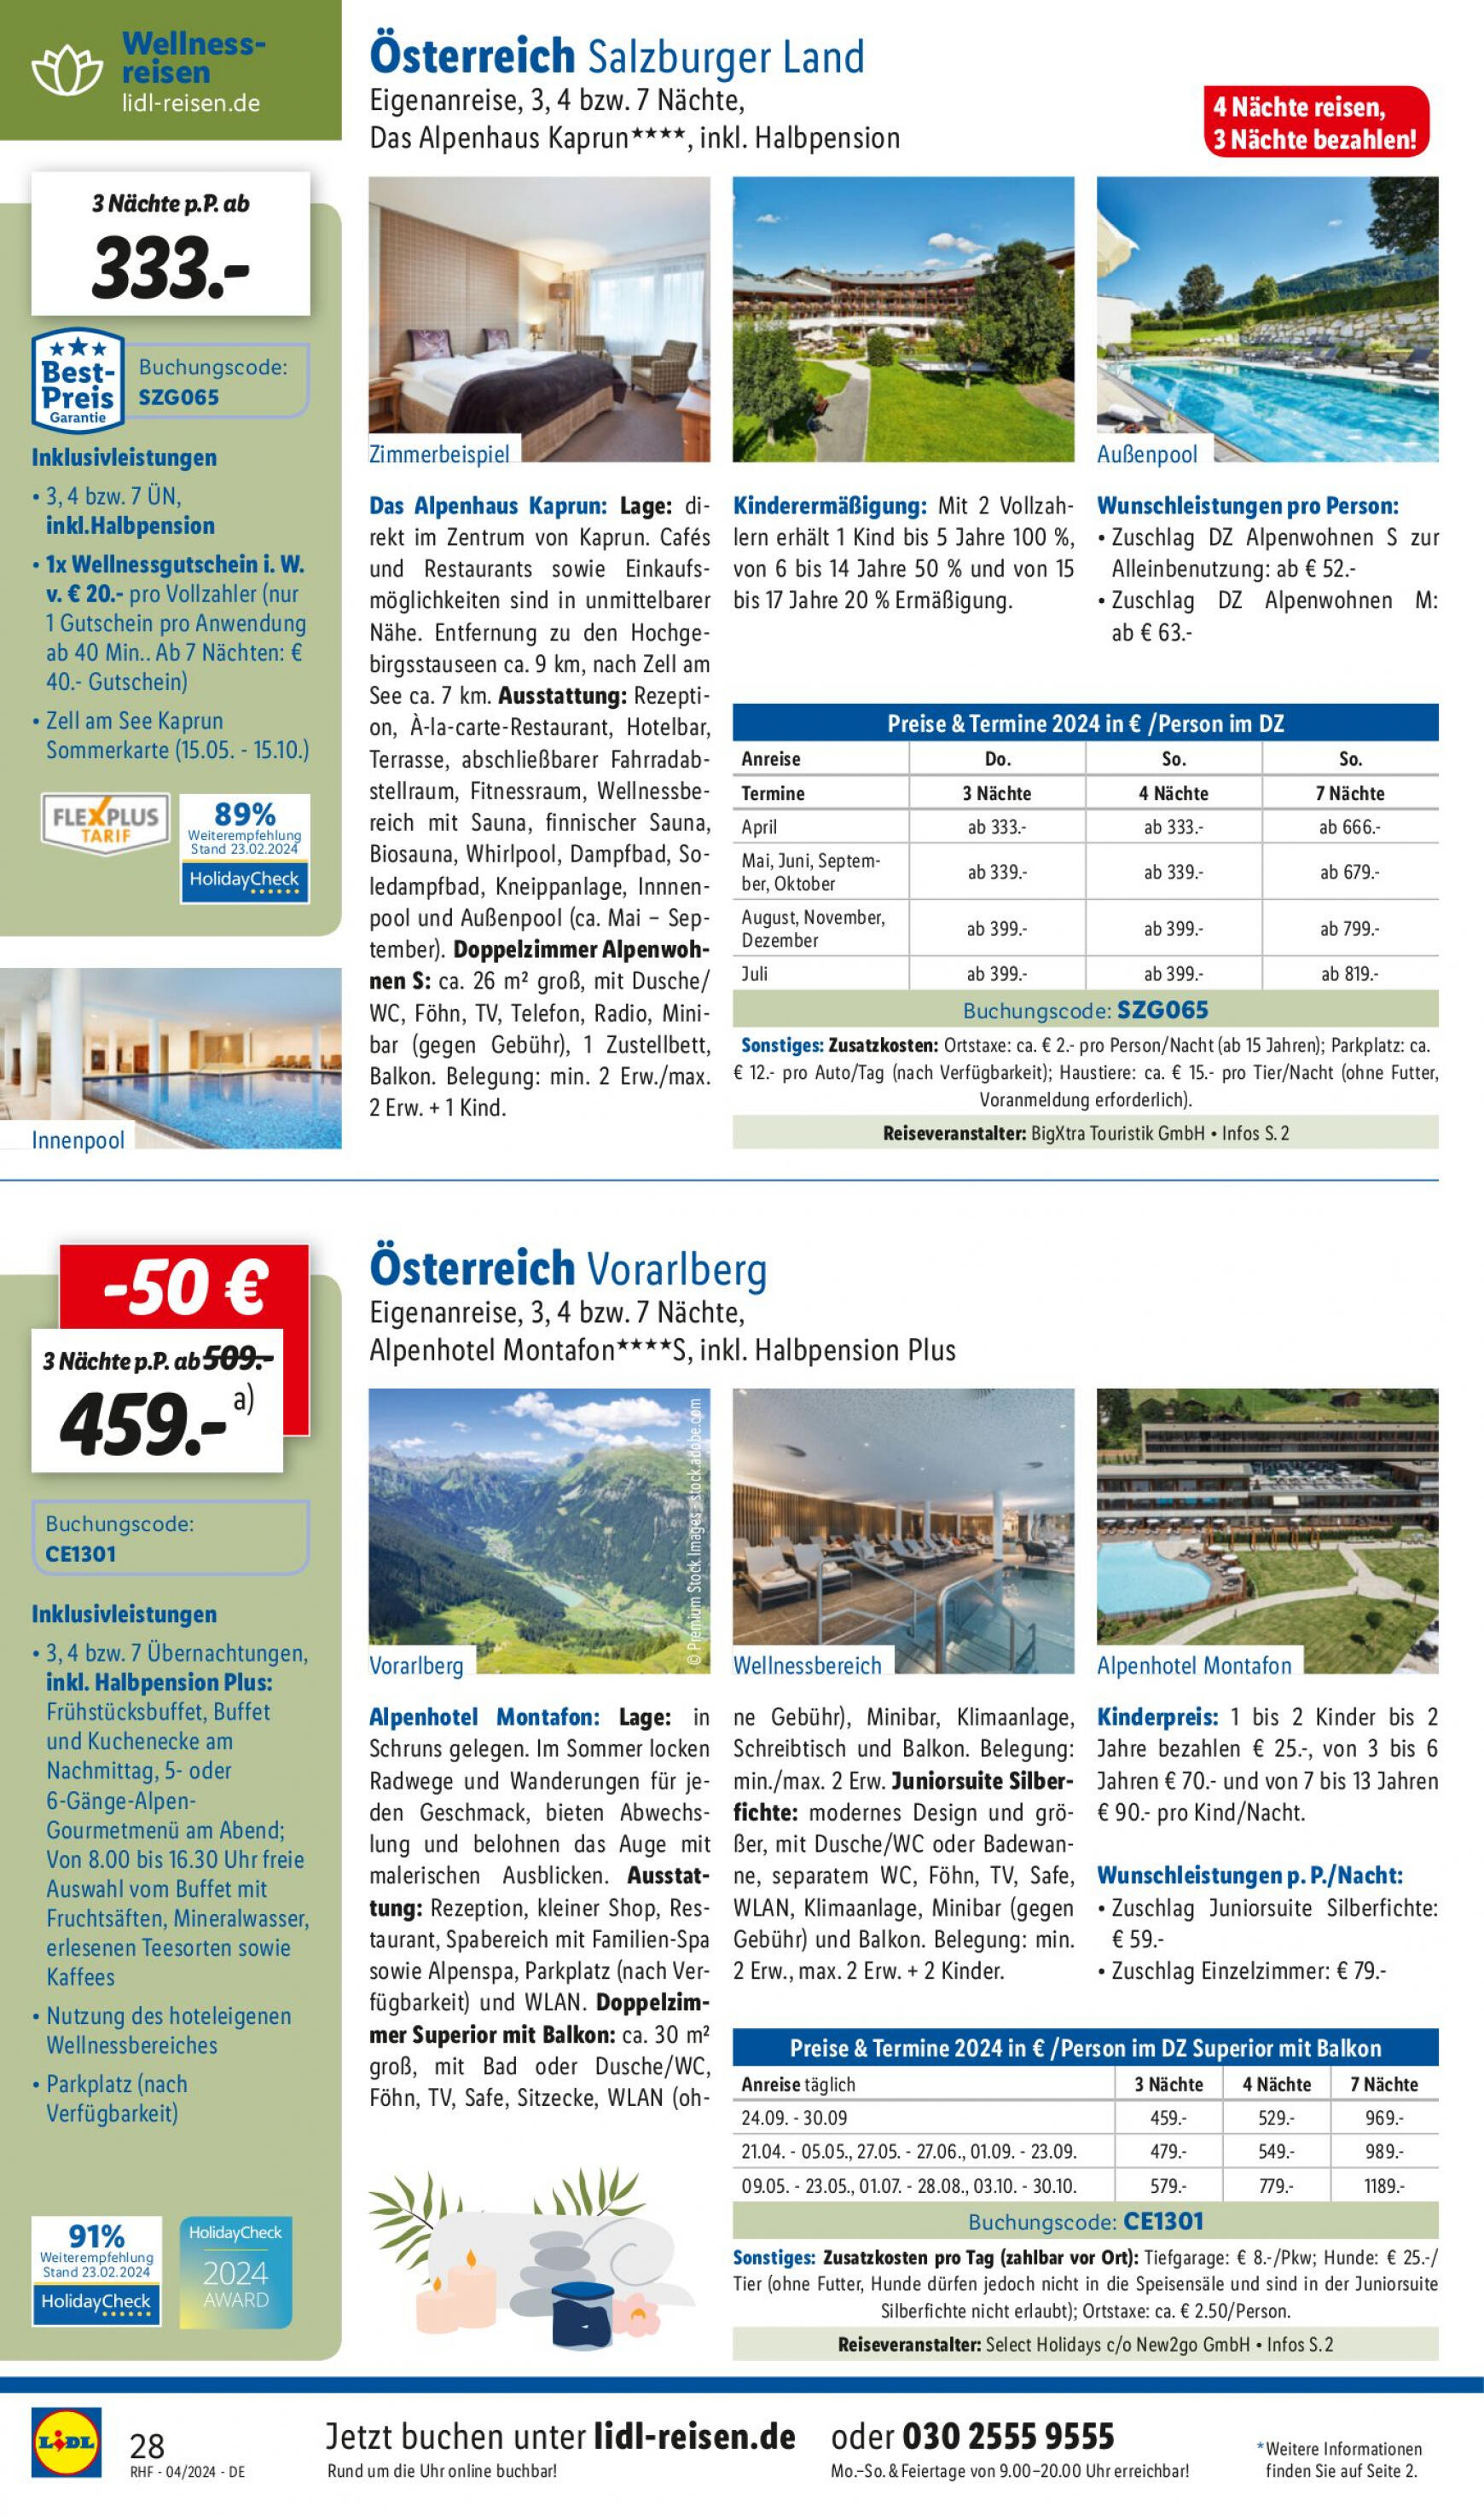 lidl - Flyer Lidl - April Reise-Highlights aktuell 27.03. - 30.04. - page: 28